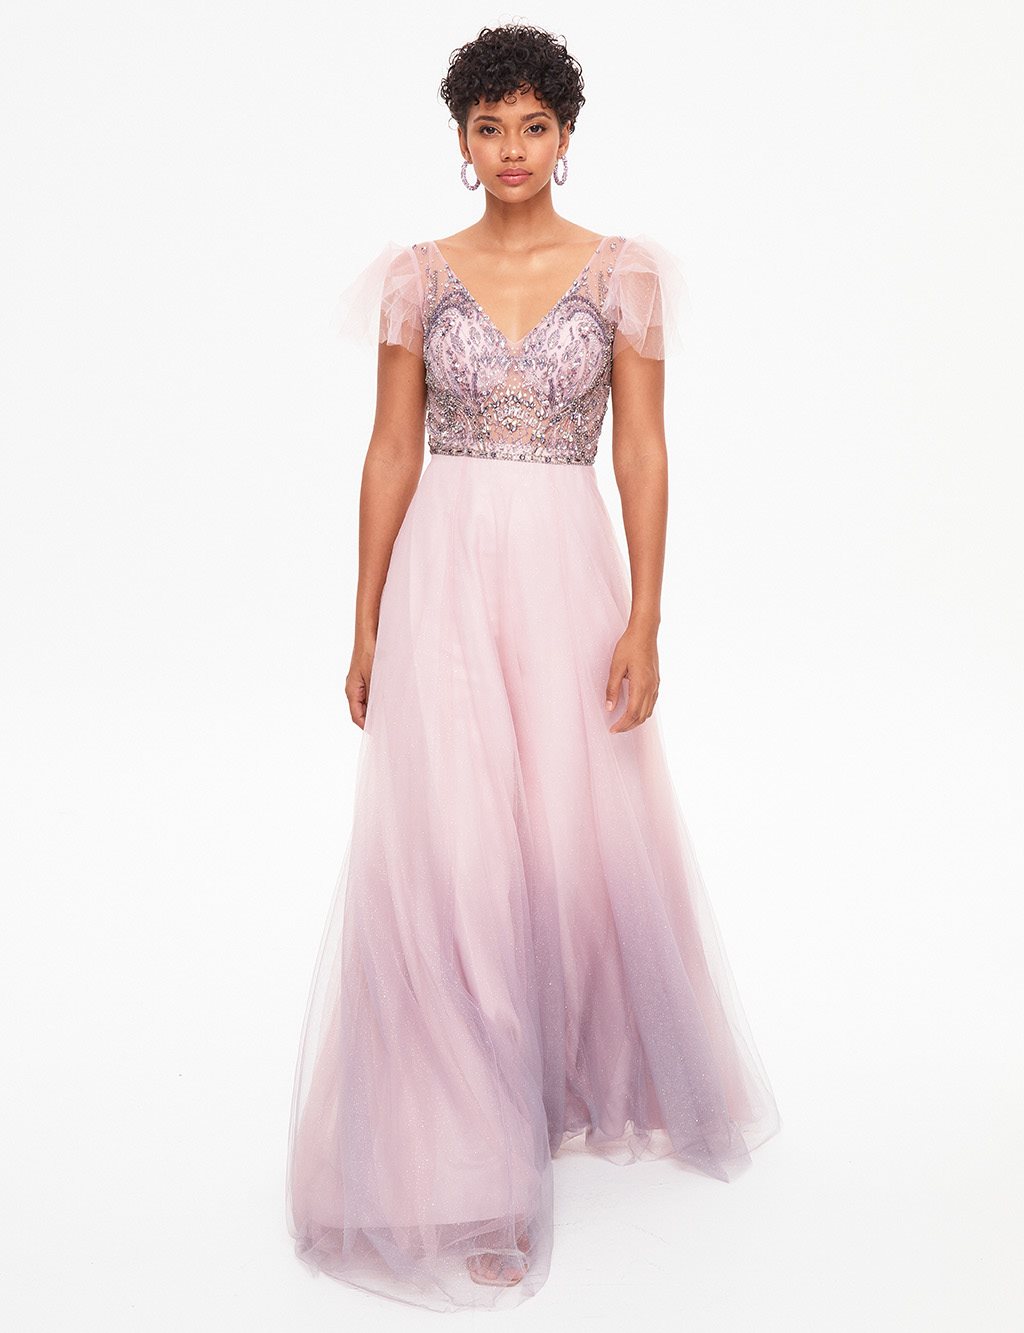 Stone Embroidered Tulle Skirt Evening Dress Blush